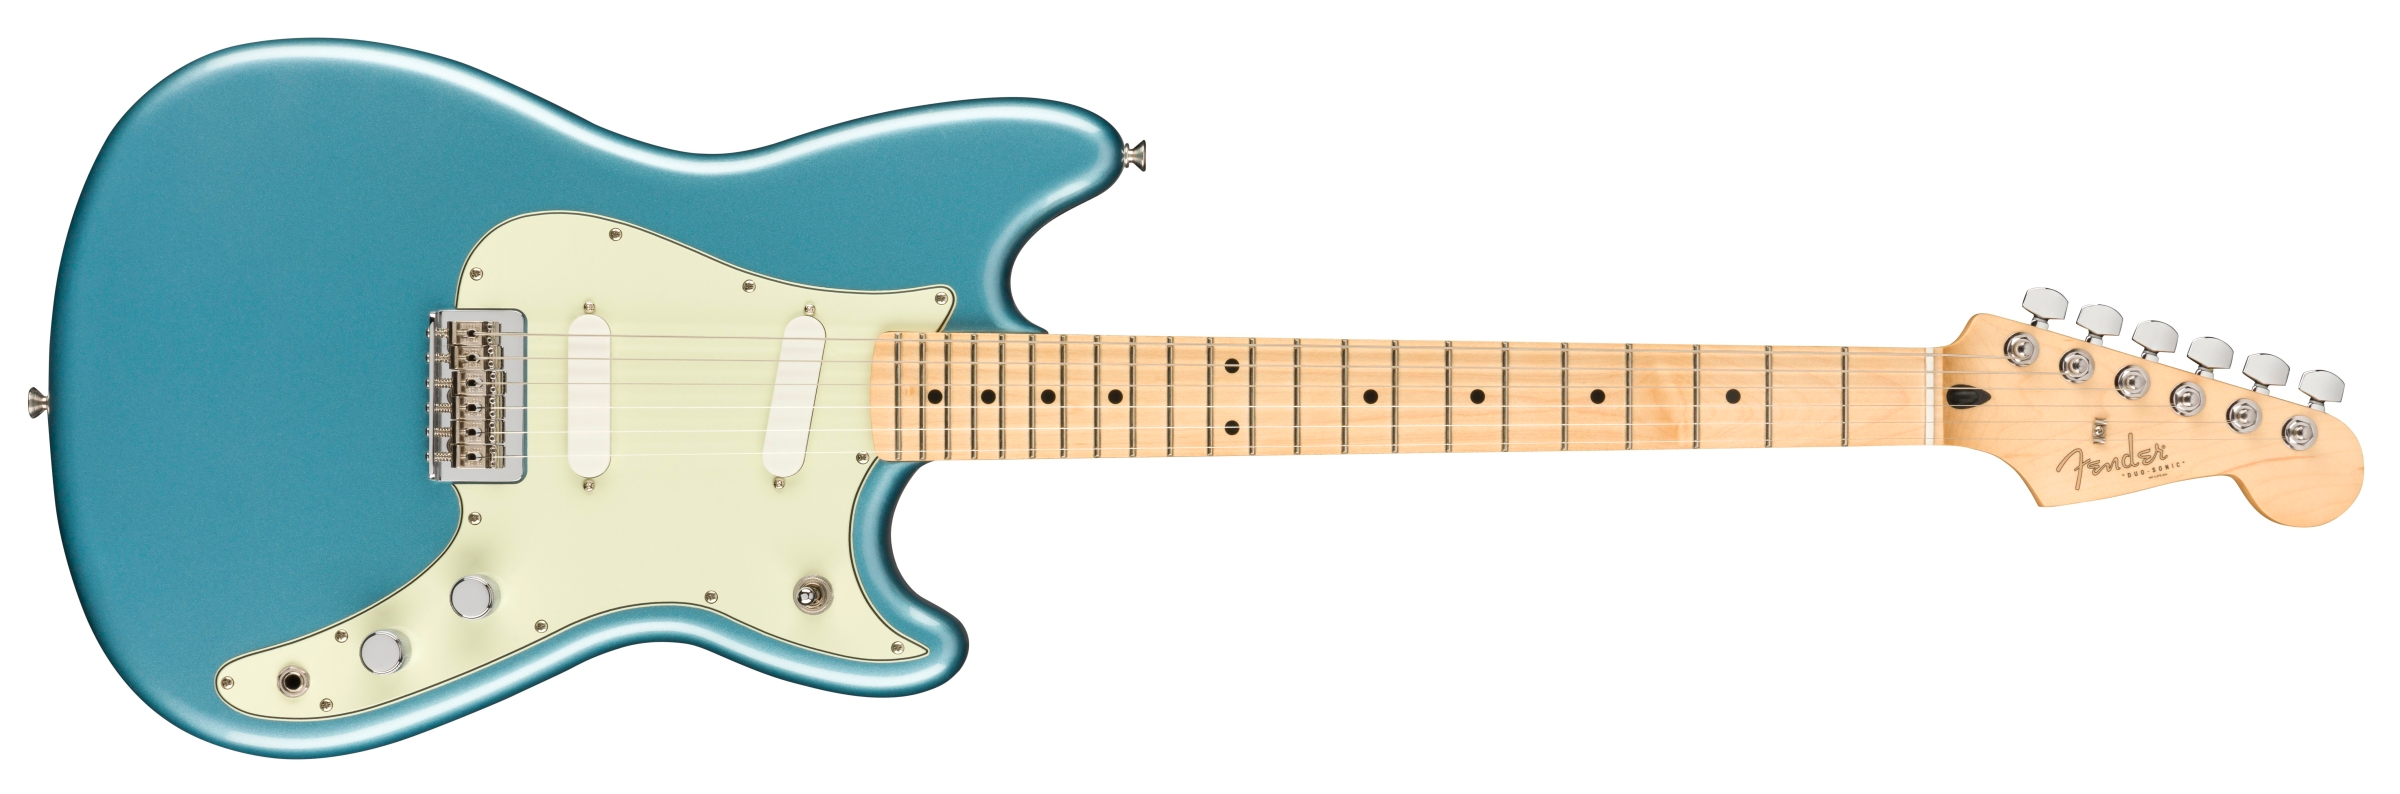 Fender Announces New Additions To Their Player Series